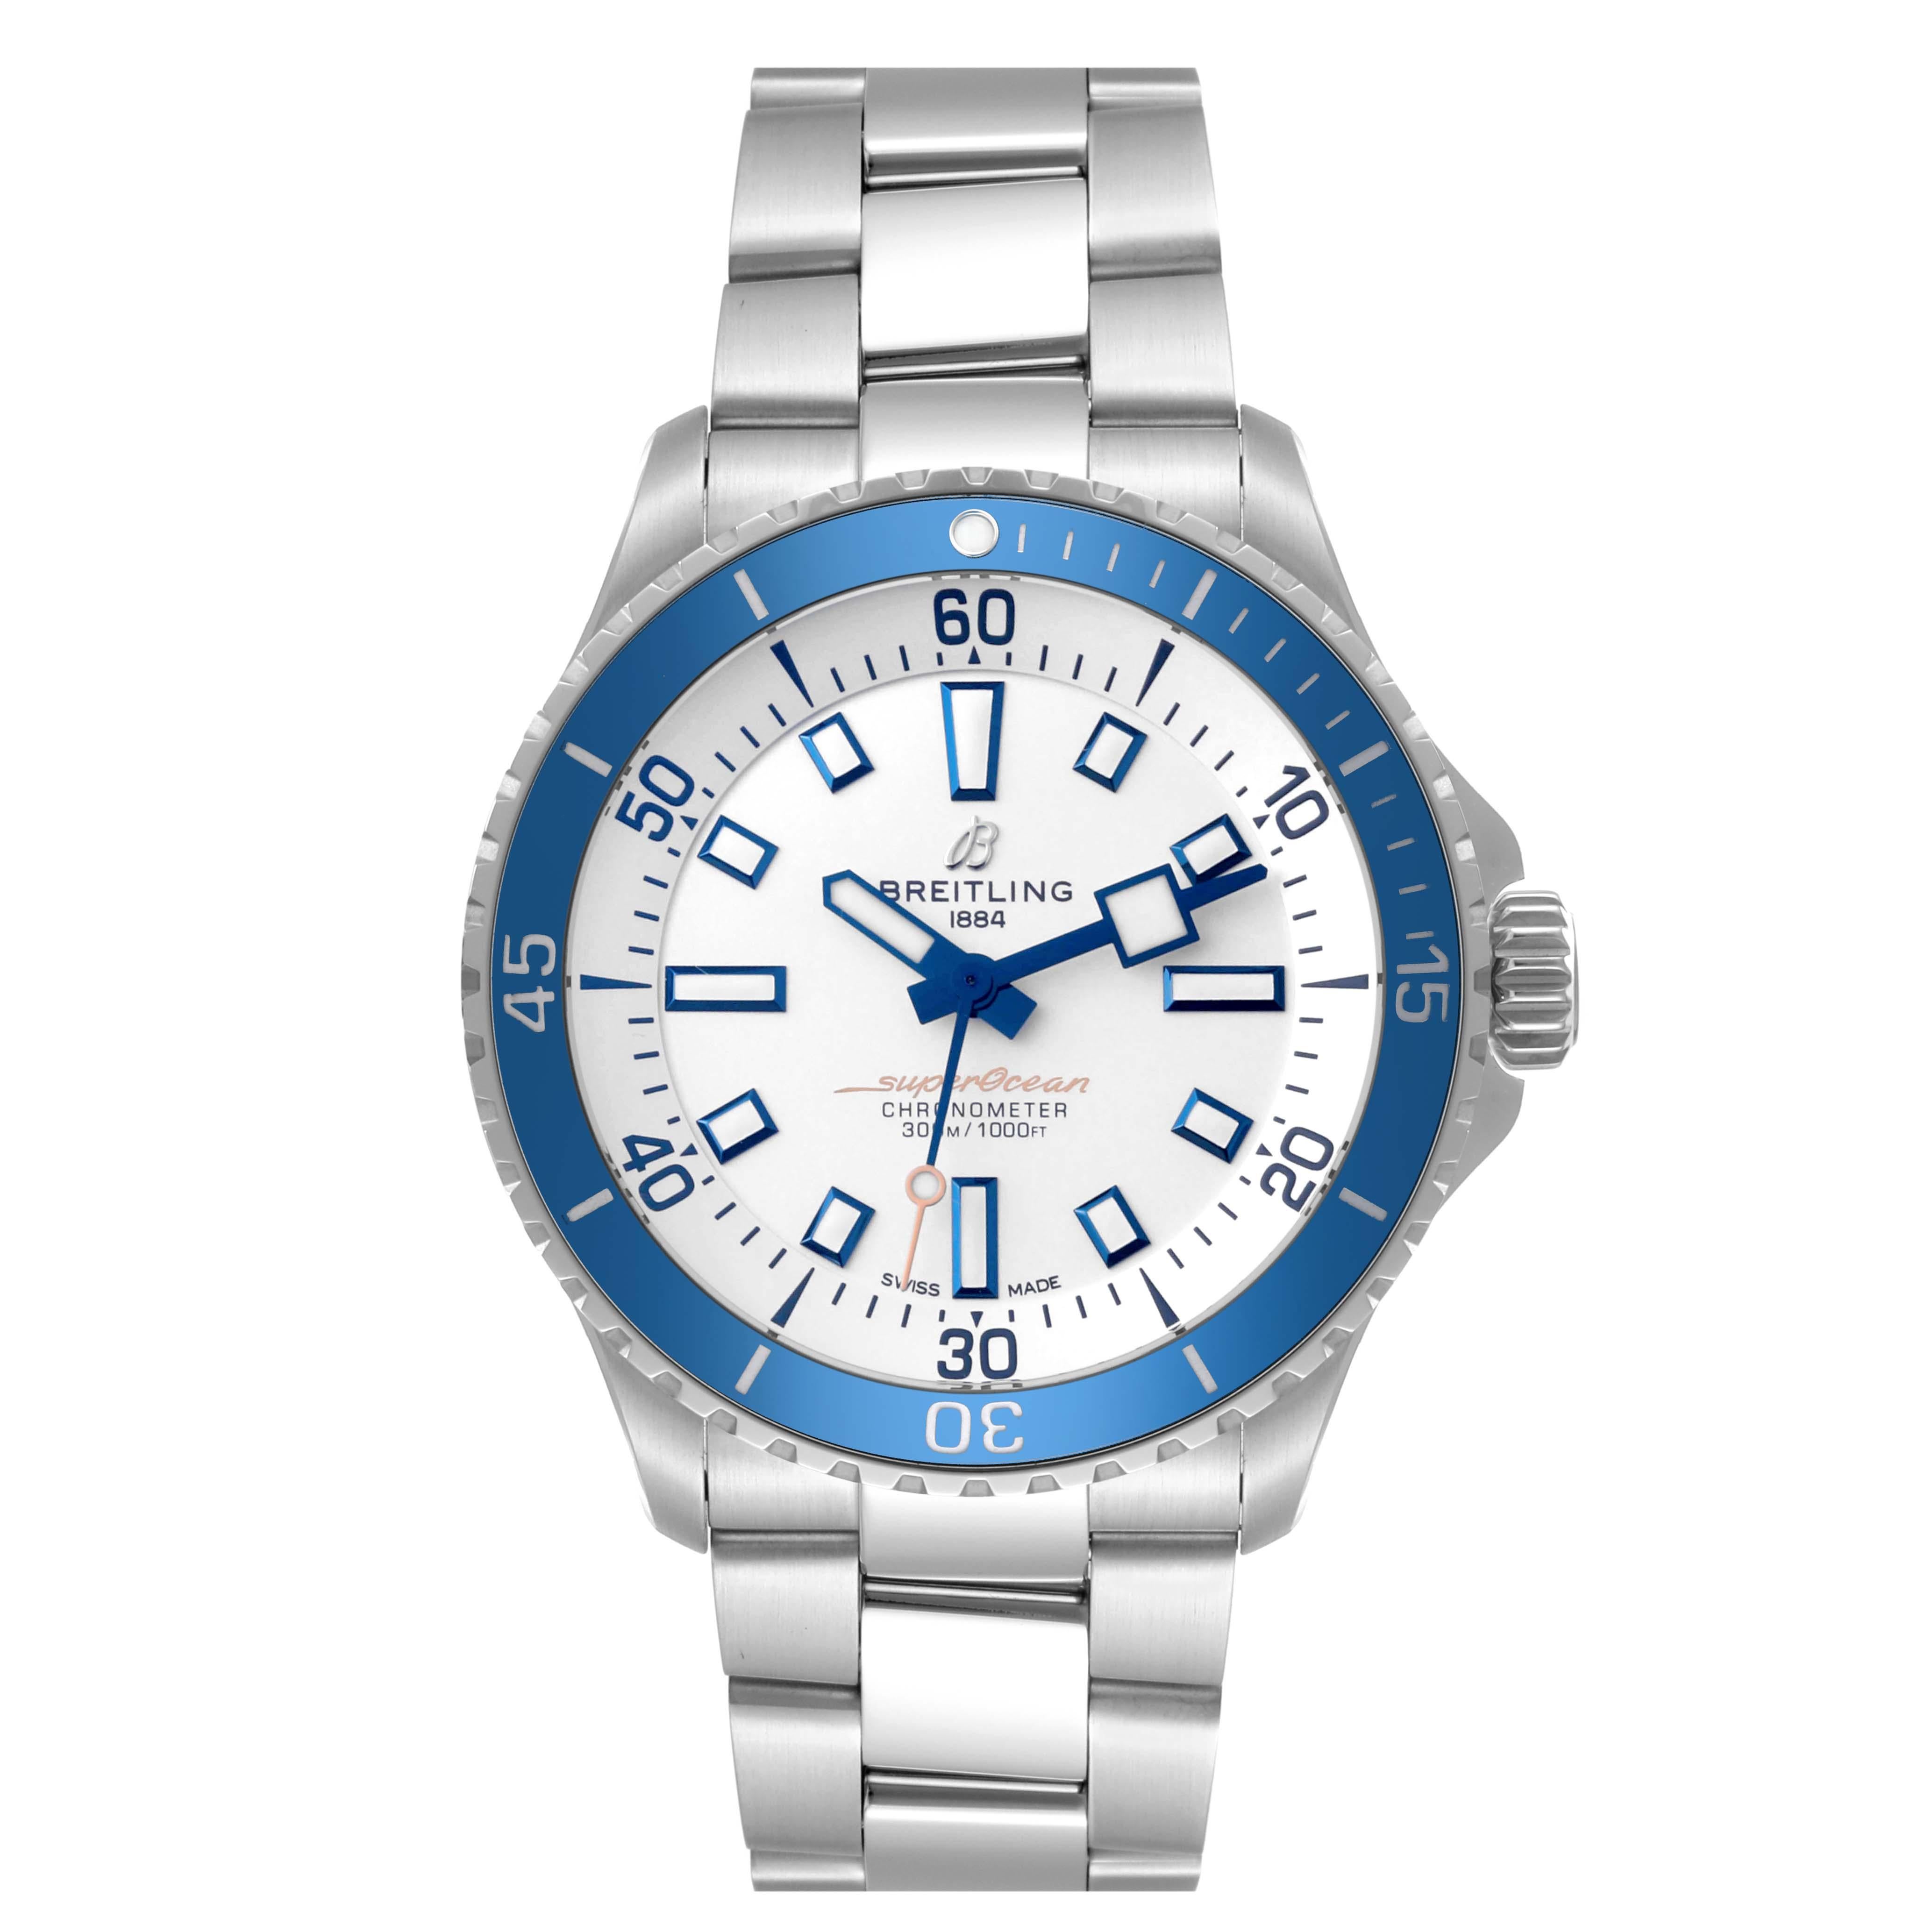 Breitling Superocean 42 White Dial Steel Mens Watch A17375. Automatic self-winding movement. Stainless steel case 42.0 mm in diameter. Case thickness: 12.5 mm. Blue stainless steel unidirectional rotating bezel. 0-60 elapsed time. Scratch resistant